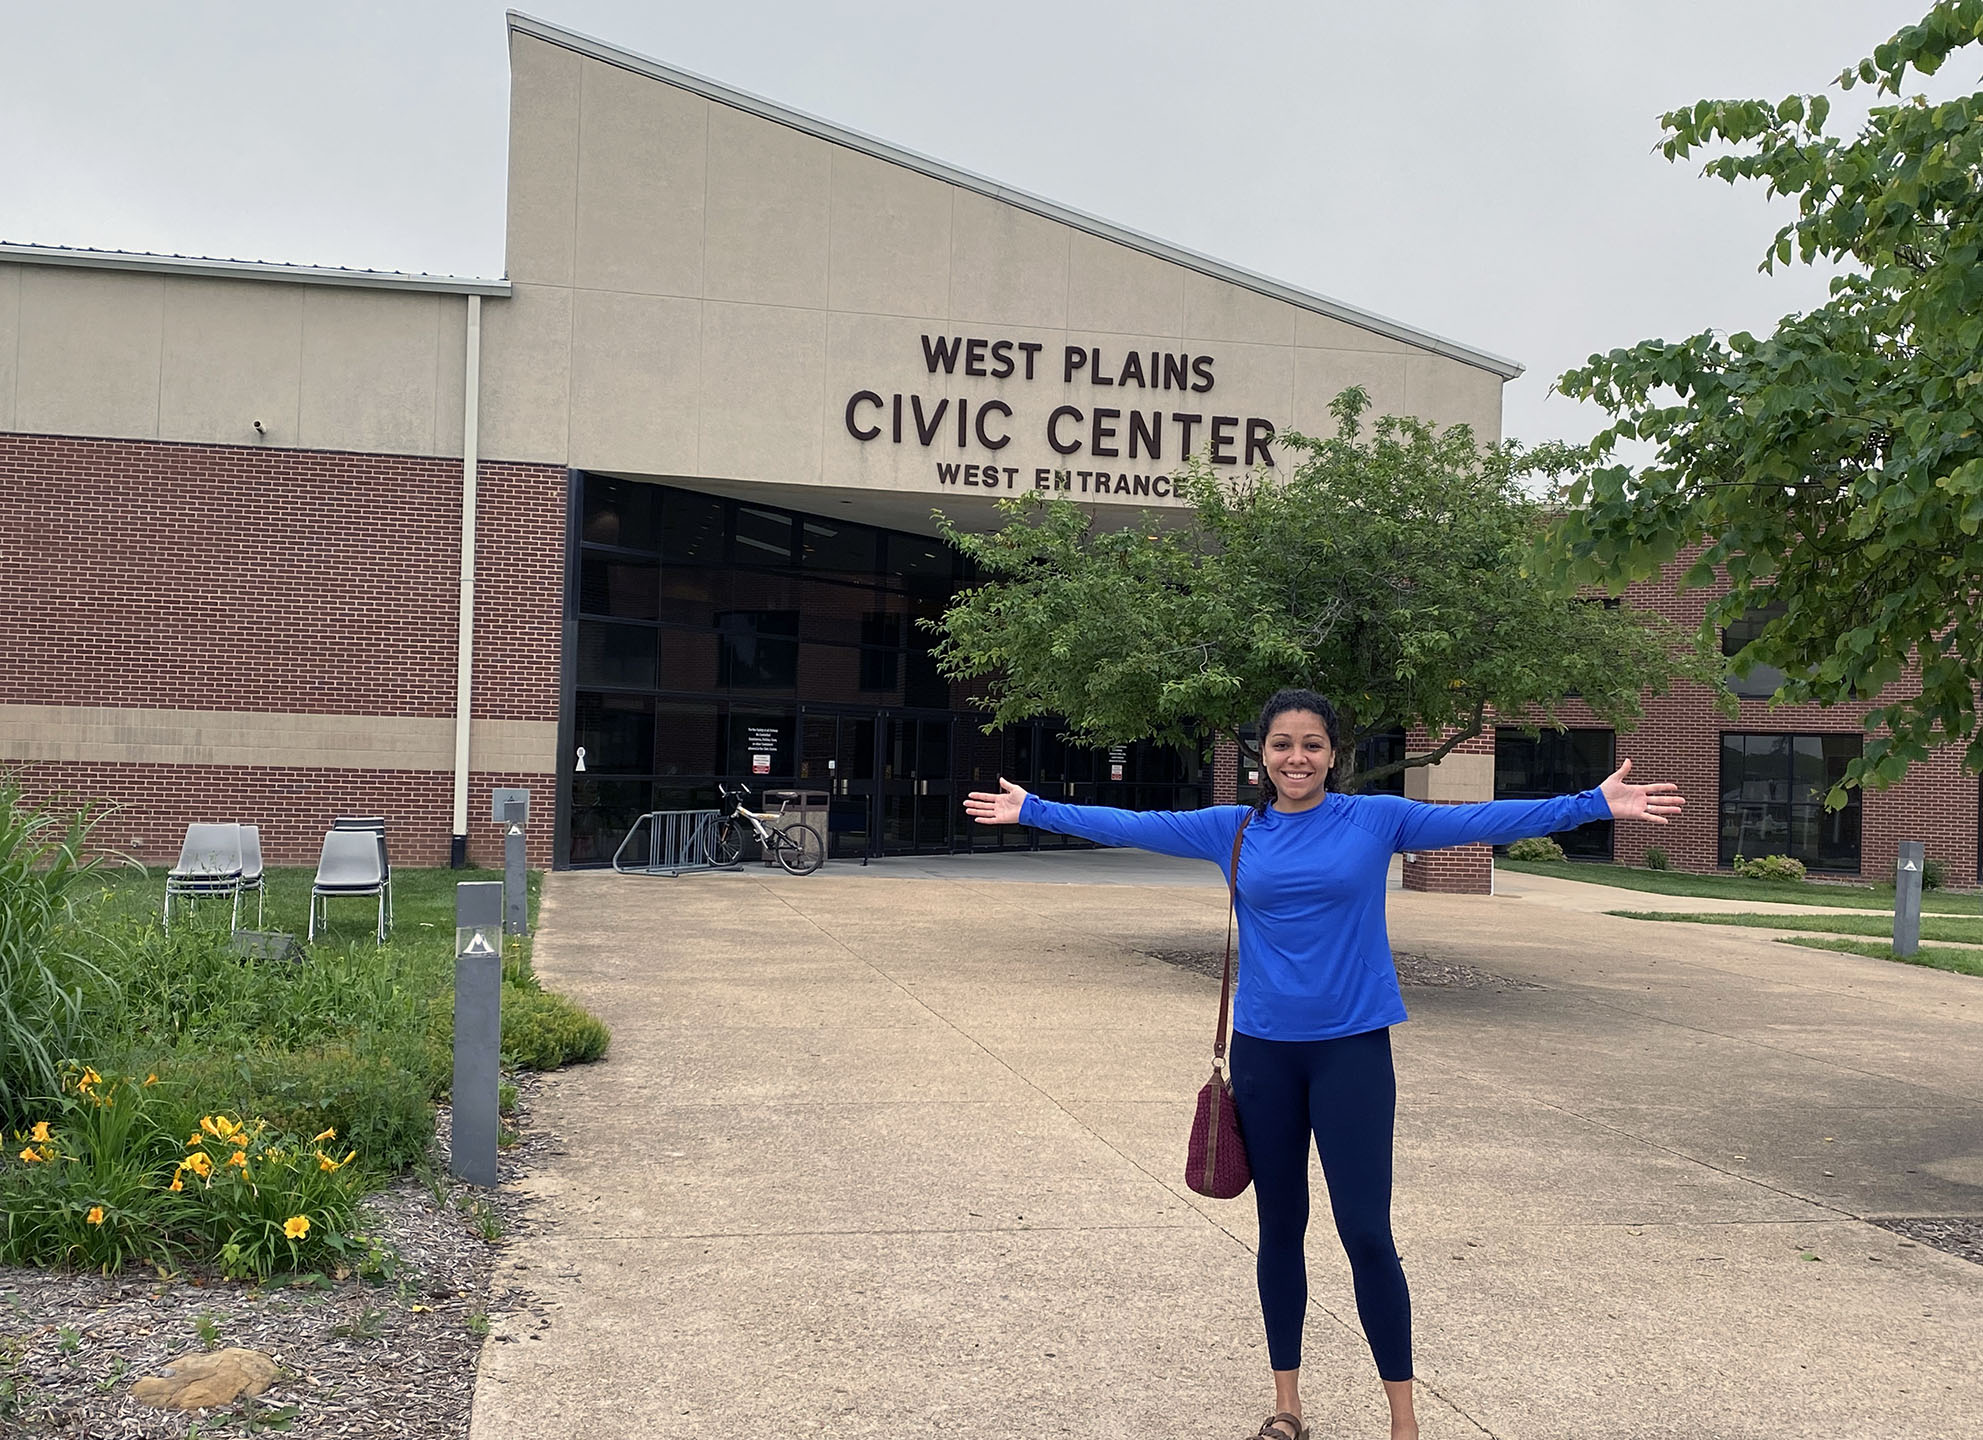 Patricia Figueiredo stands in front of the West Plains Civic Center entrance